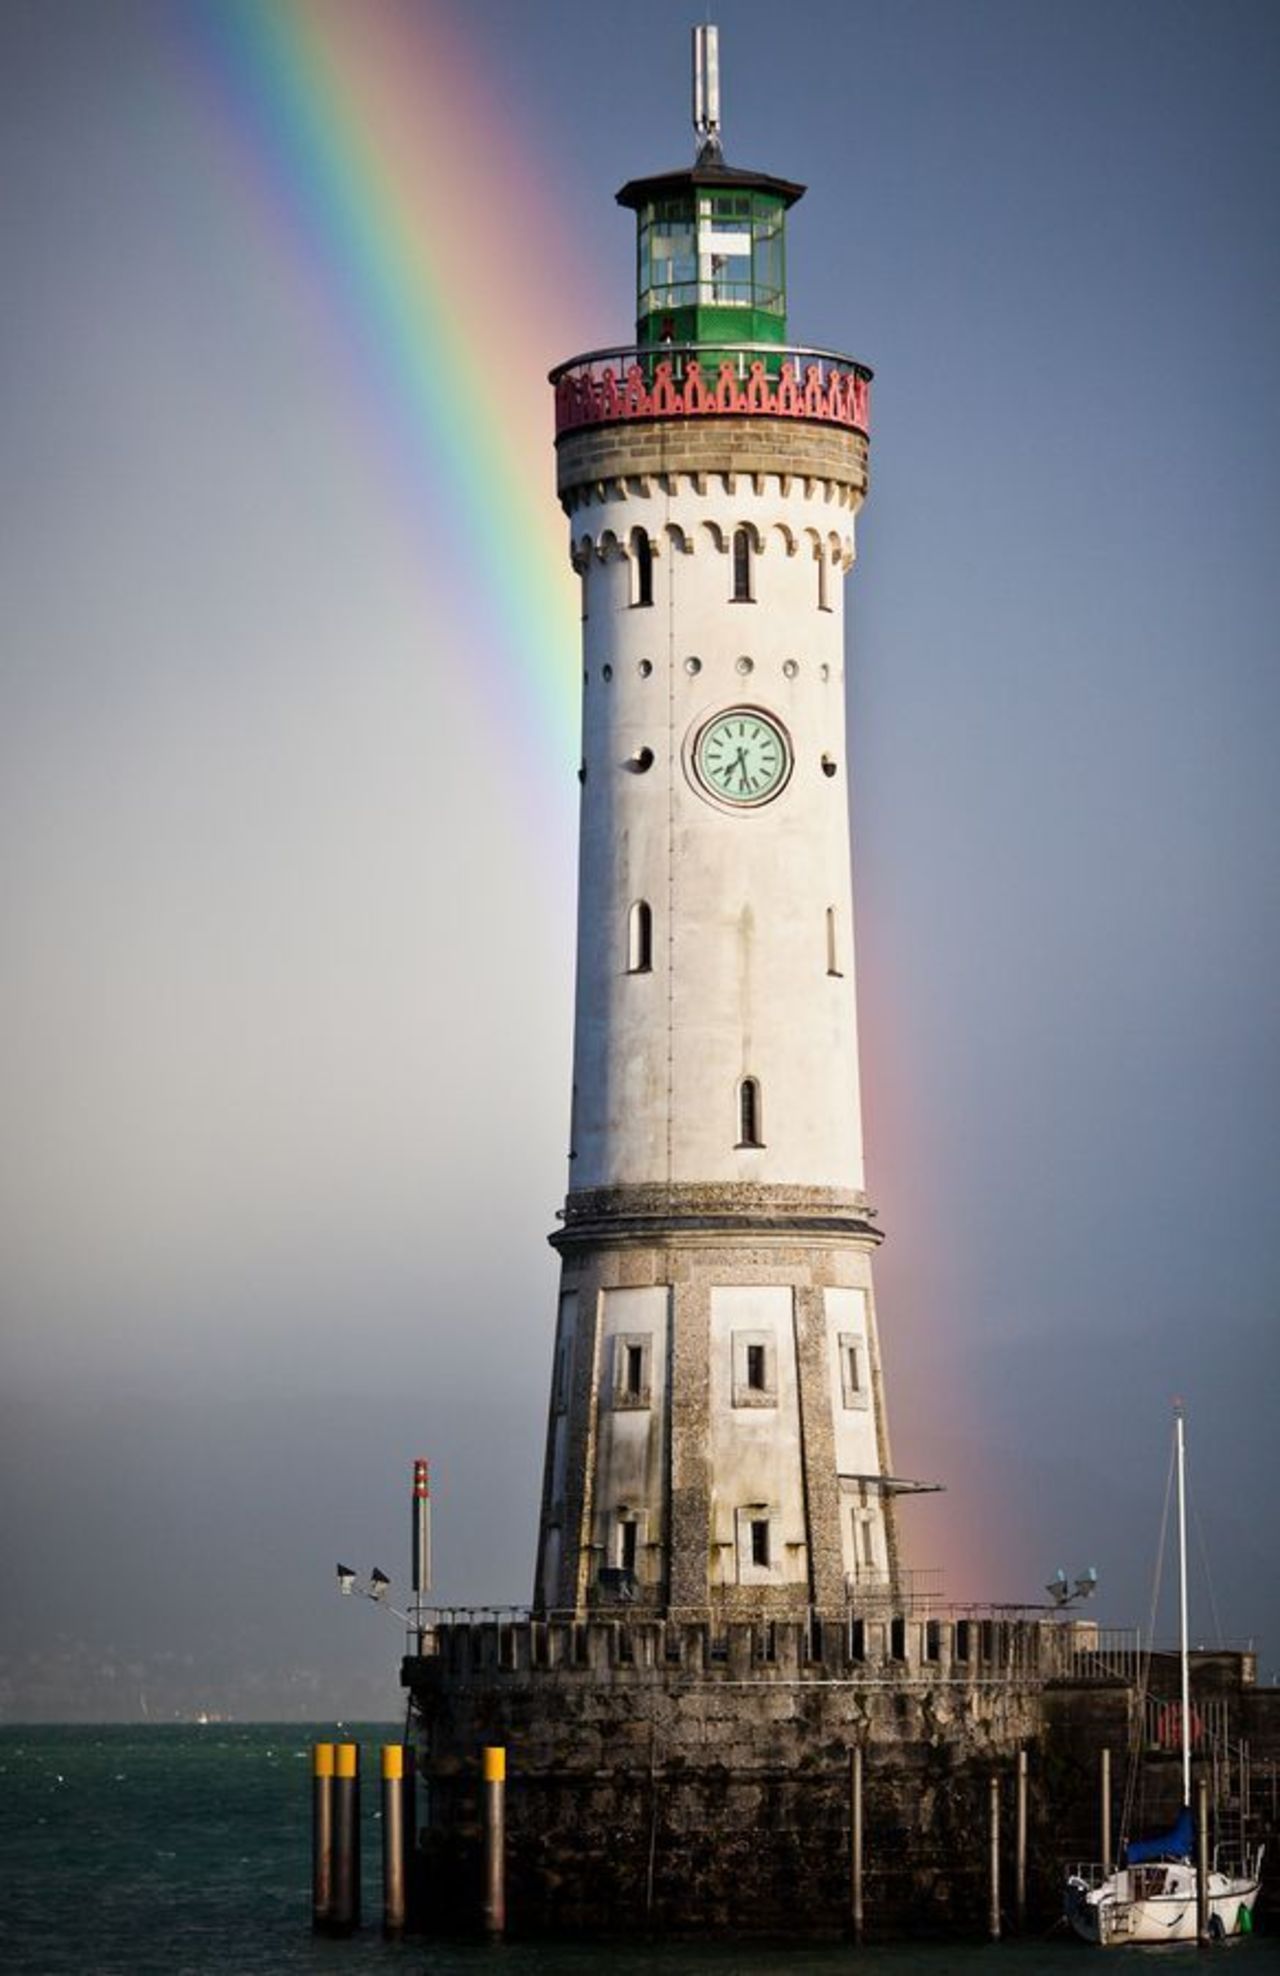 #Lindau Lighthouse at #Bodensee, Germany (by Alexey Tselishchev) http://t.co/7EnBTifEim